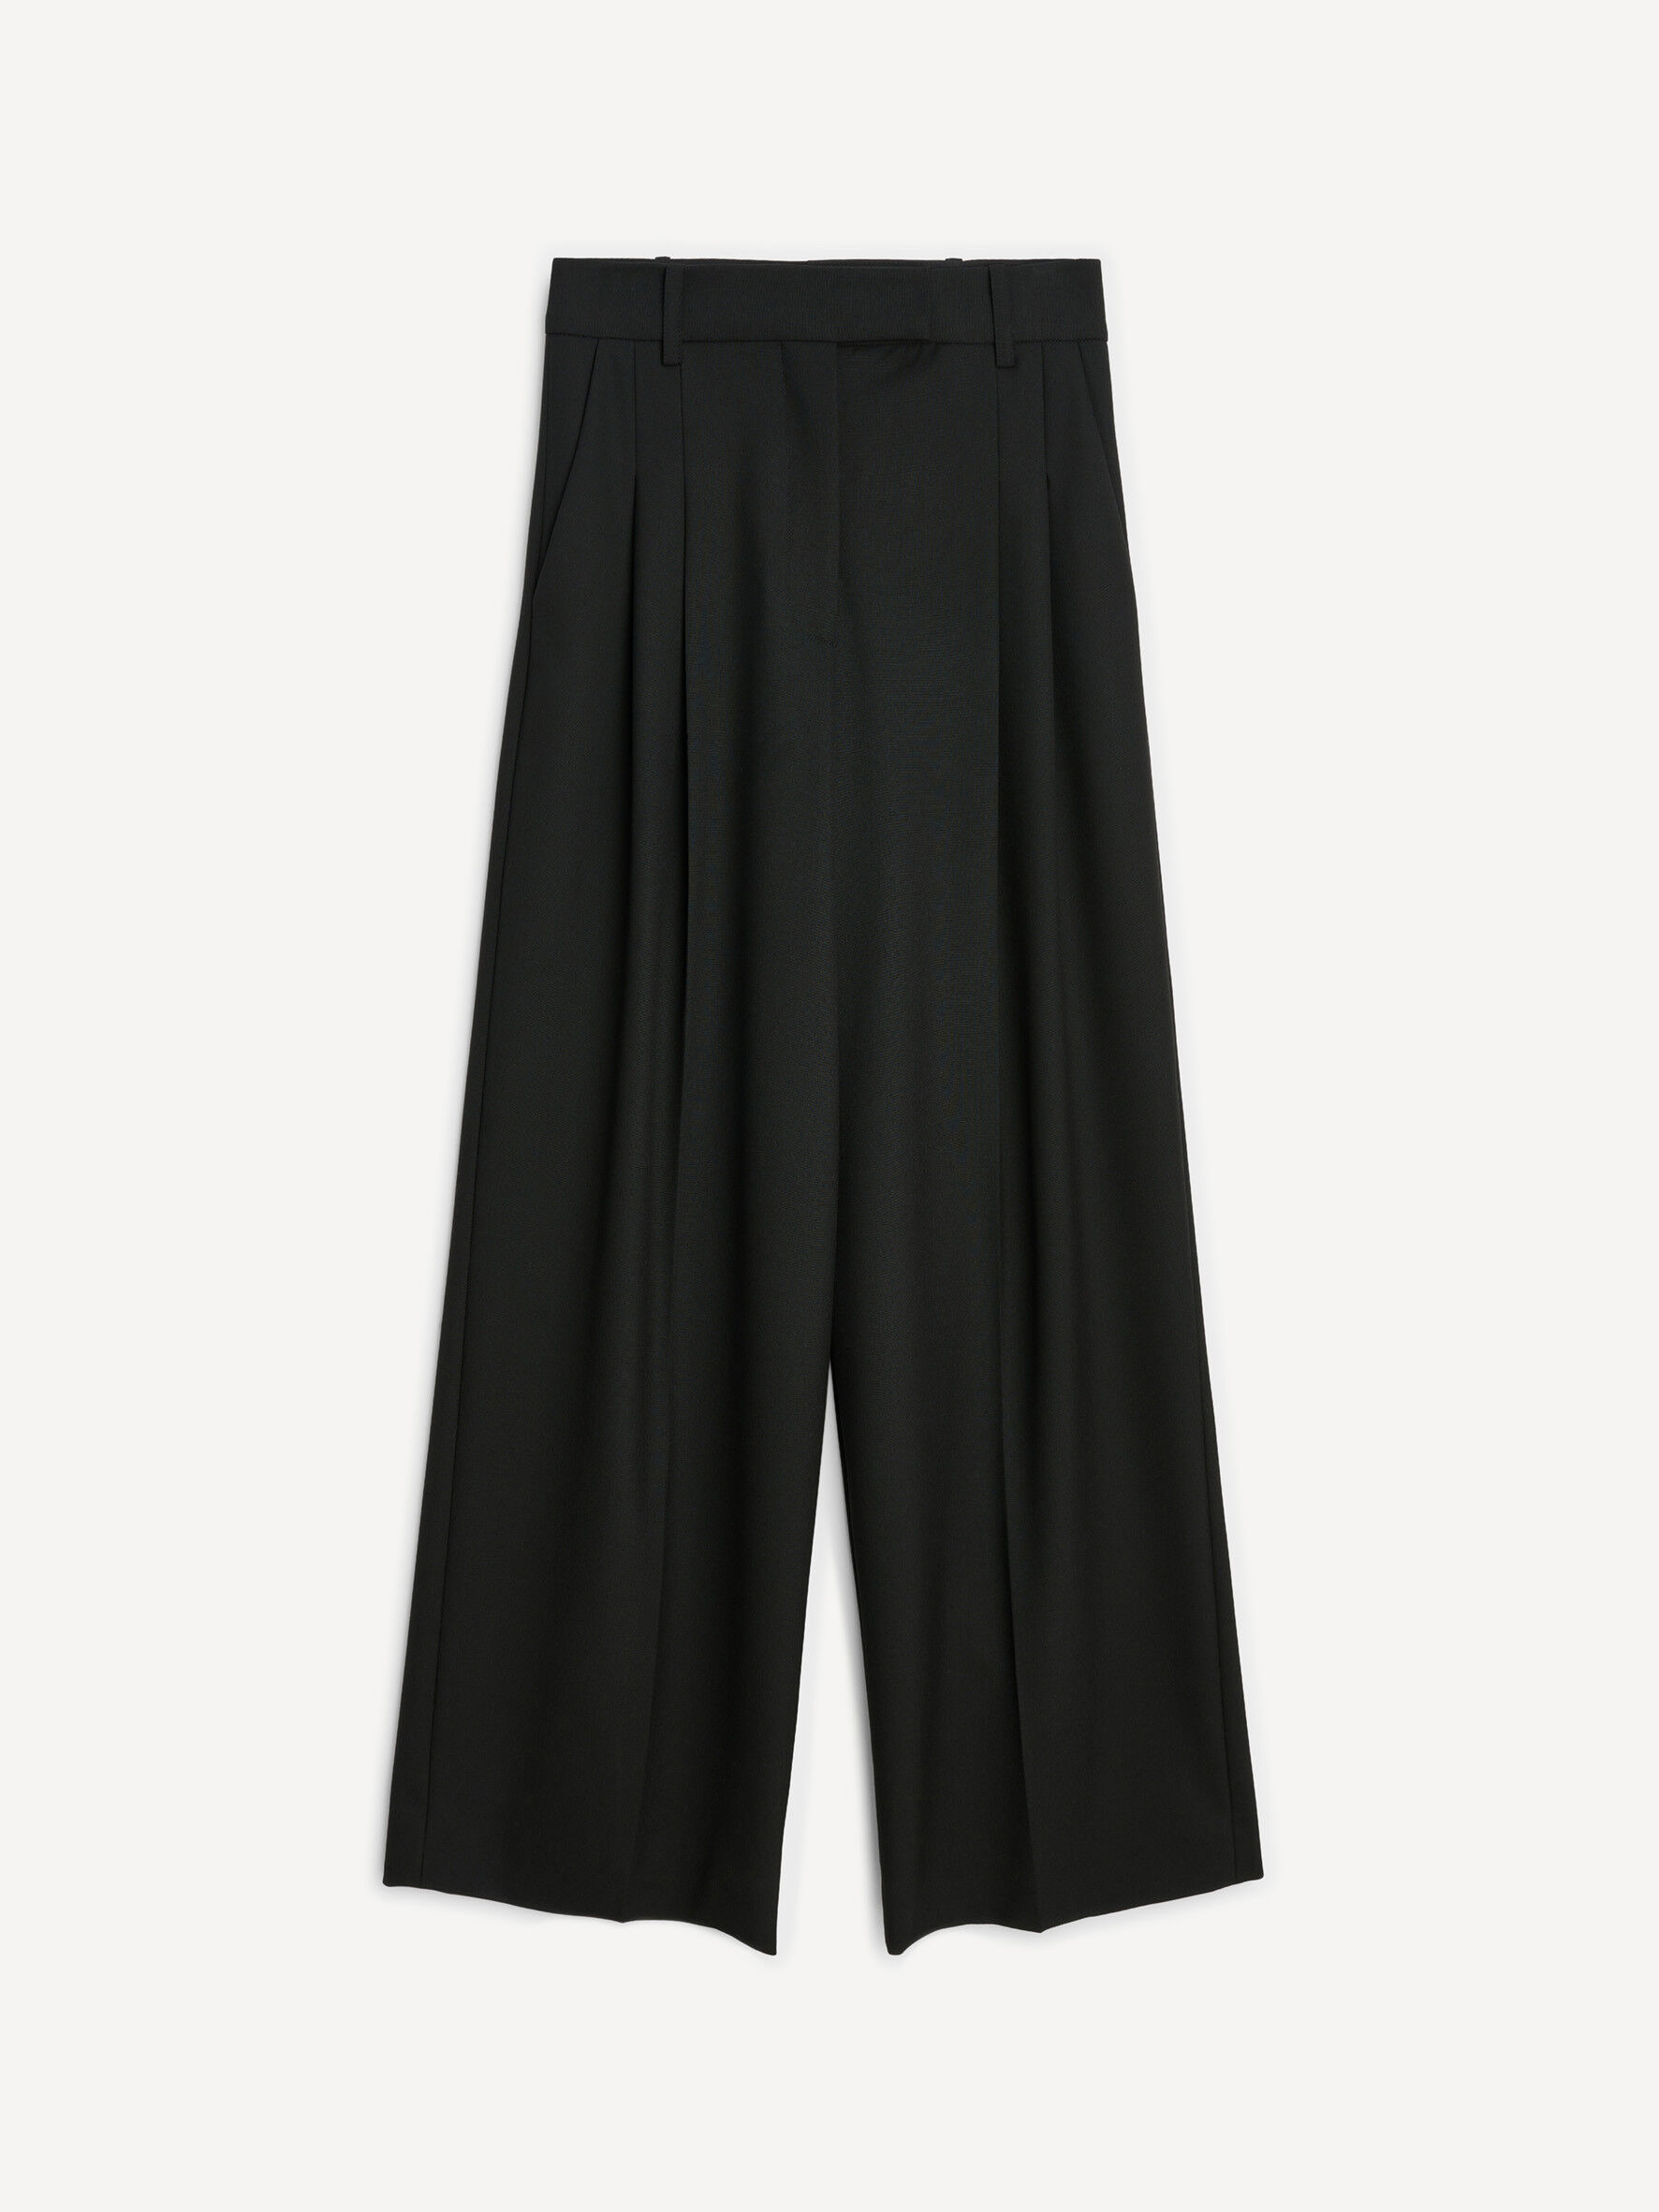 Cymbaria high-waist trousers - Buy Clothing online